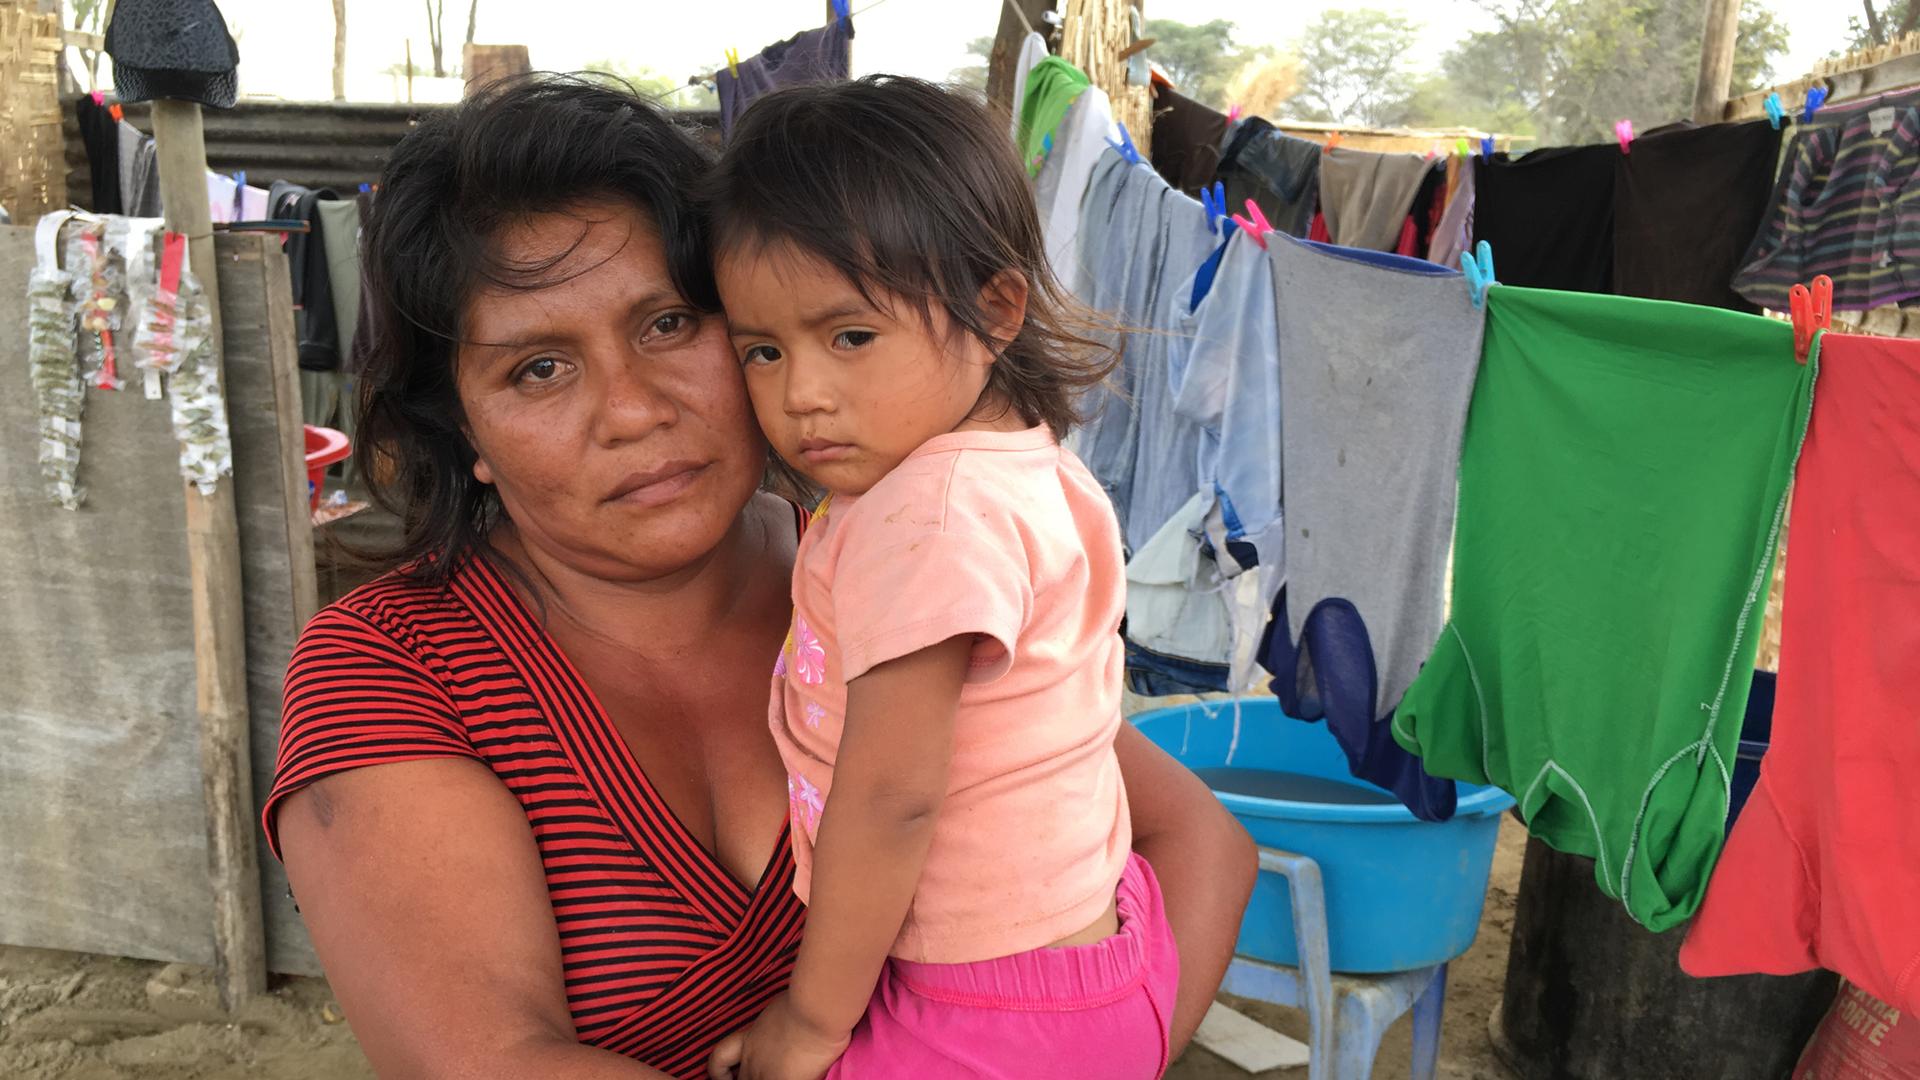 Flor Bautista holds her daughter Camila in her arms, both looking directly at camera.